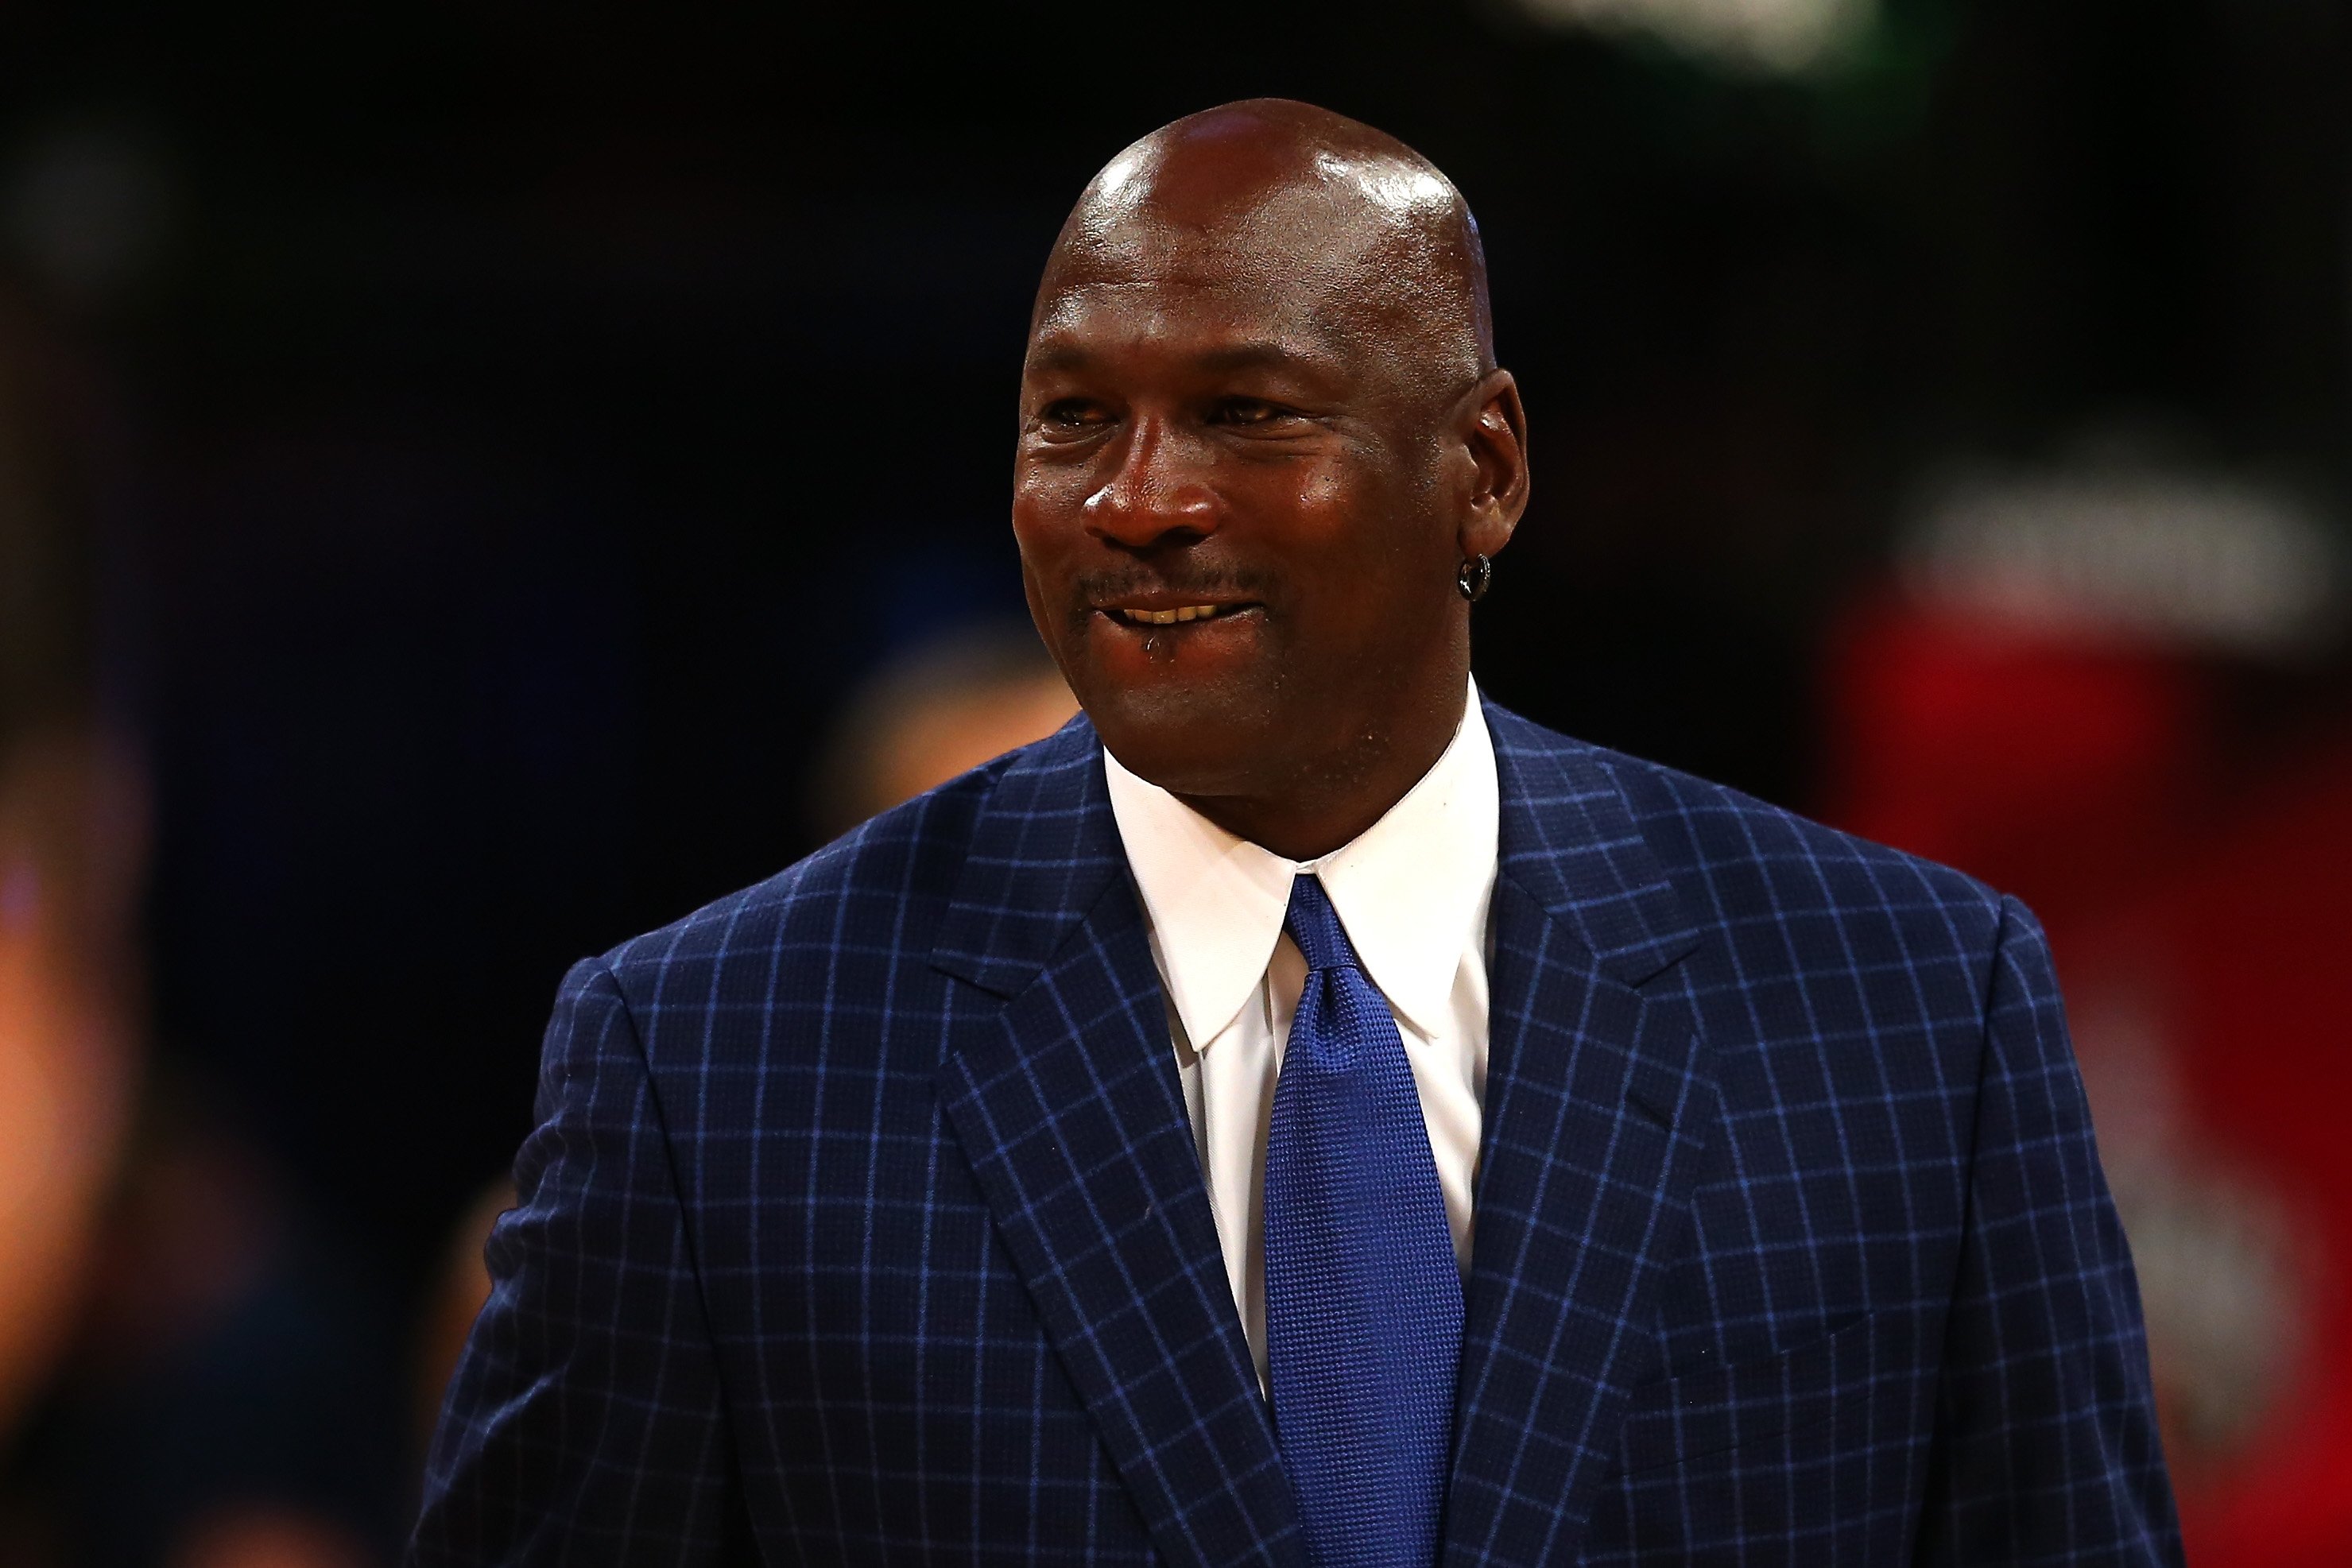 Michael Jordan walks off the court during the NBA All-Star Game 2016 at the Air Canada Centre on February 14, 2016. | Source: Getty Images